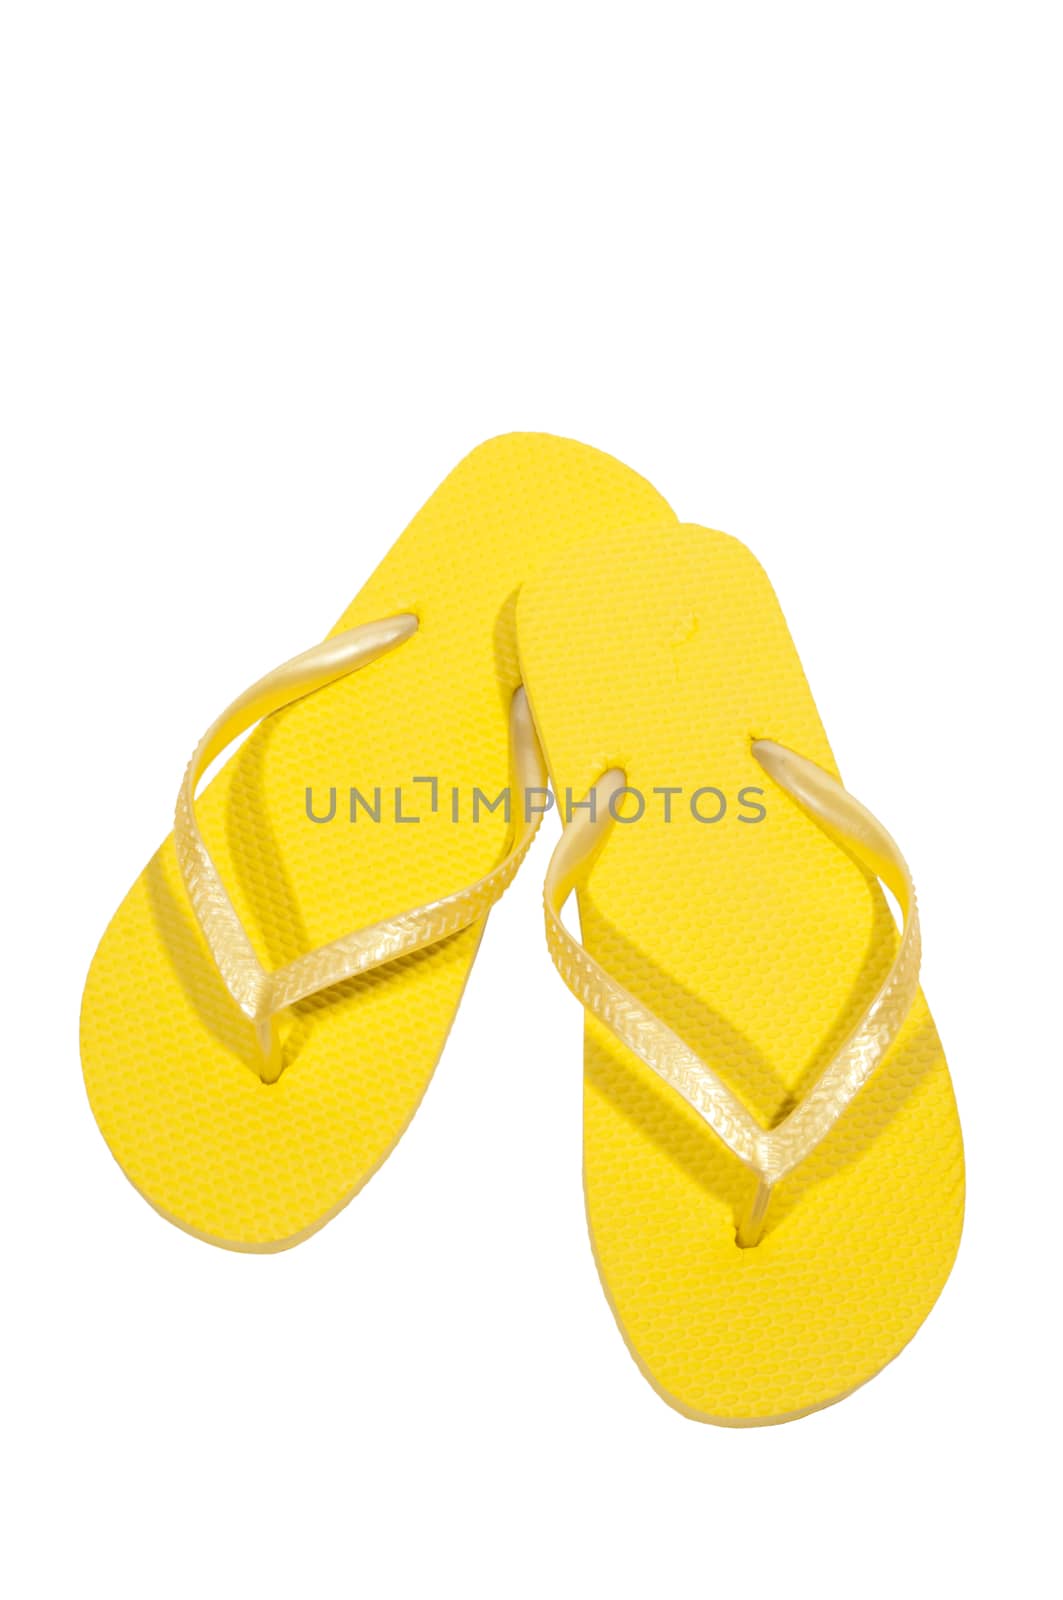 Yellow Thongs Or Flip Flops Isolated On White by stockbuster1